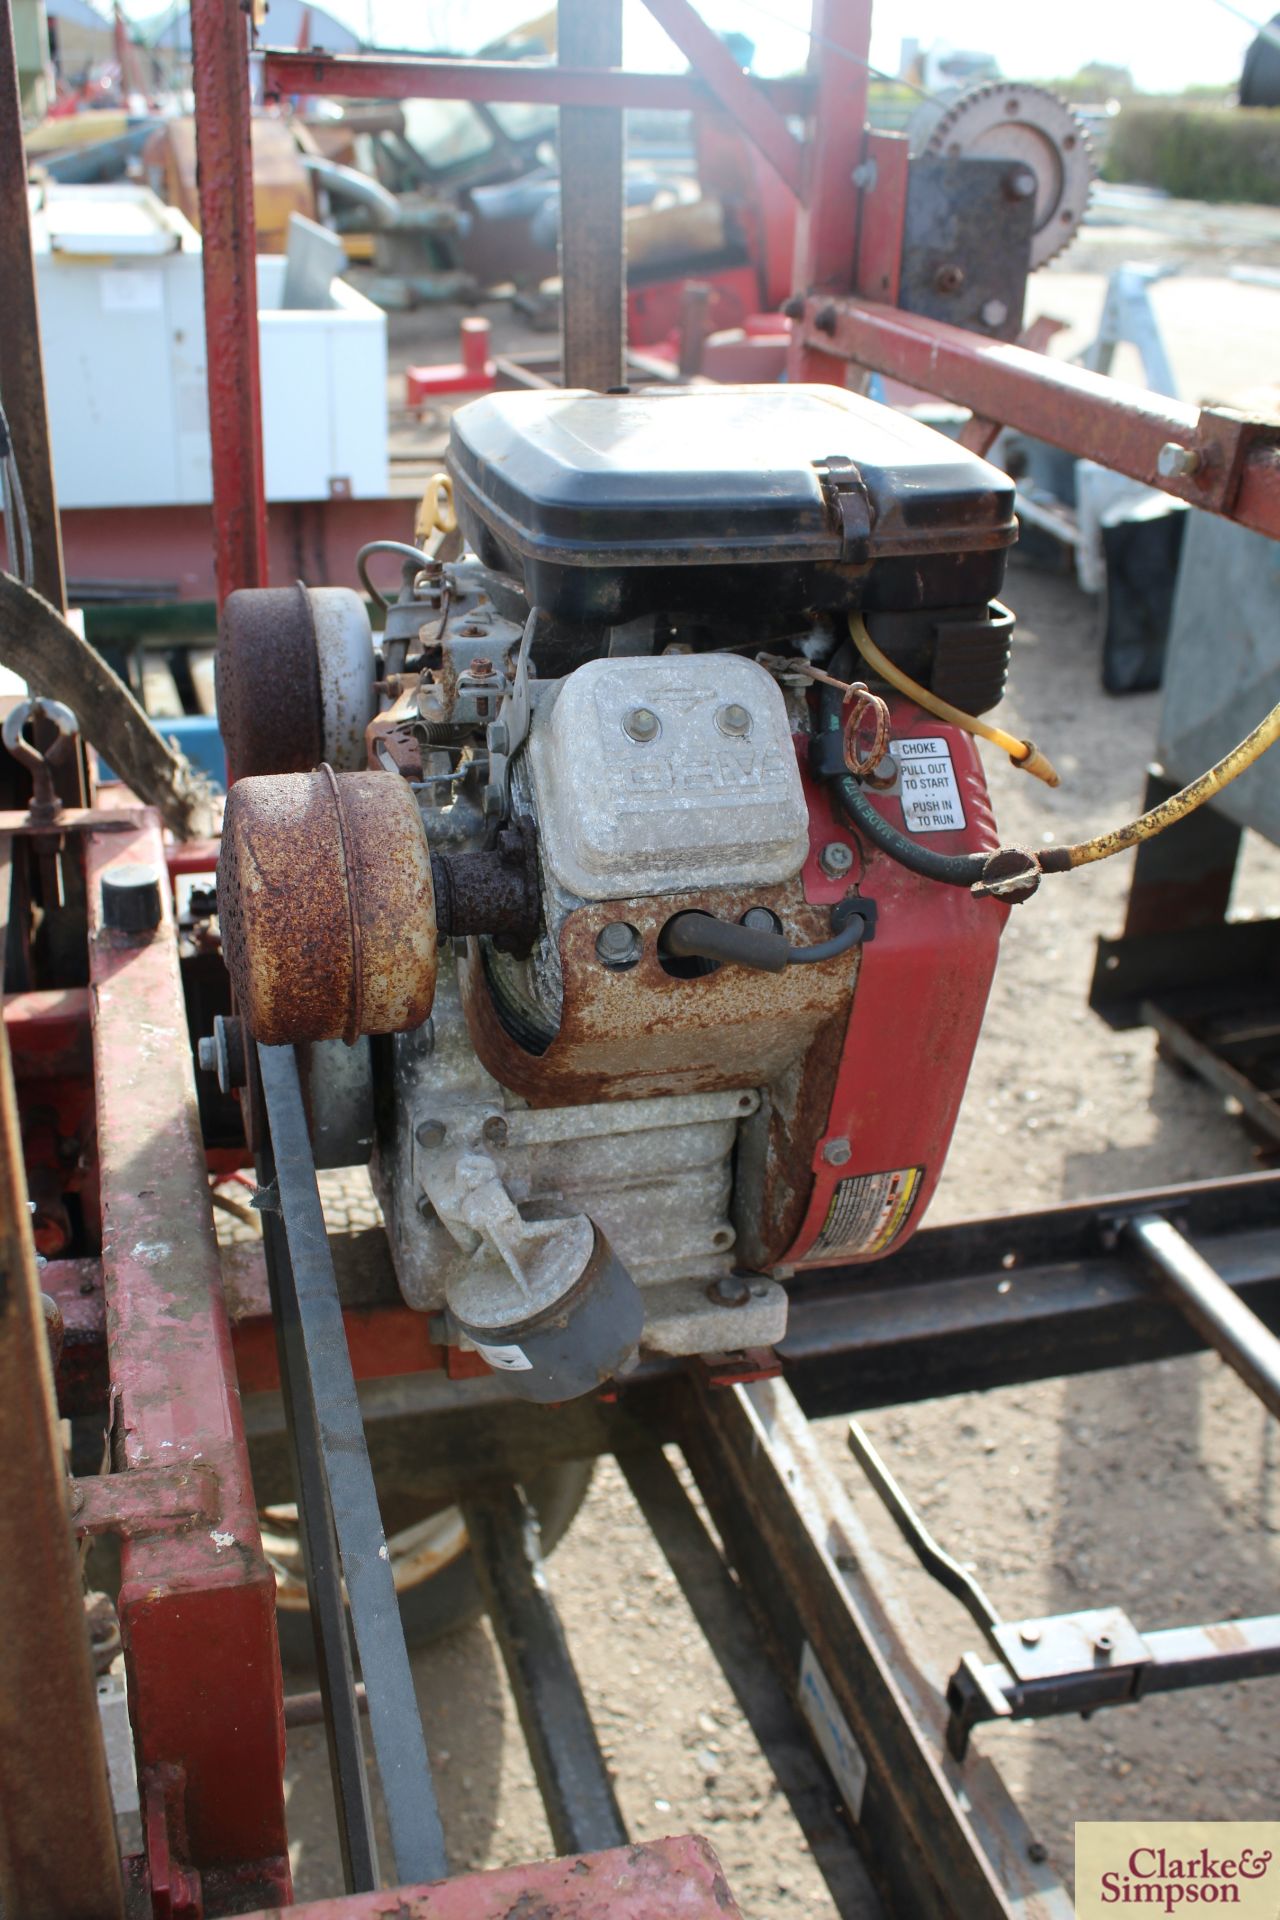 Hud-Son Oscar 30in portable trailer mounted saw mill. With Vanguard V-twin petrol engine. - Image 13 of 14